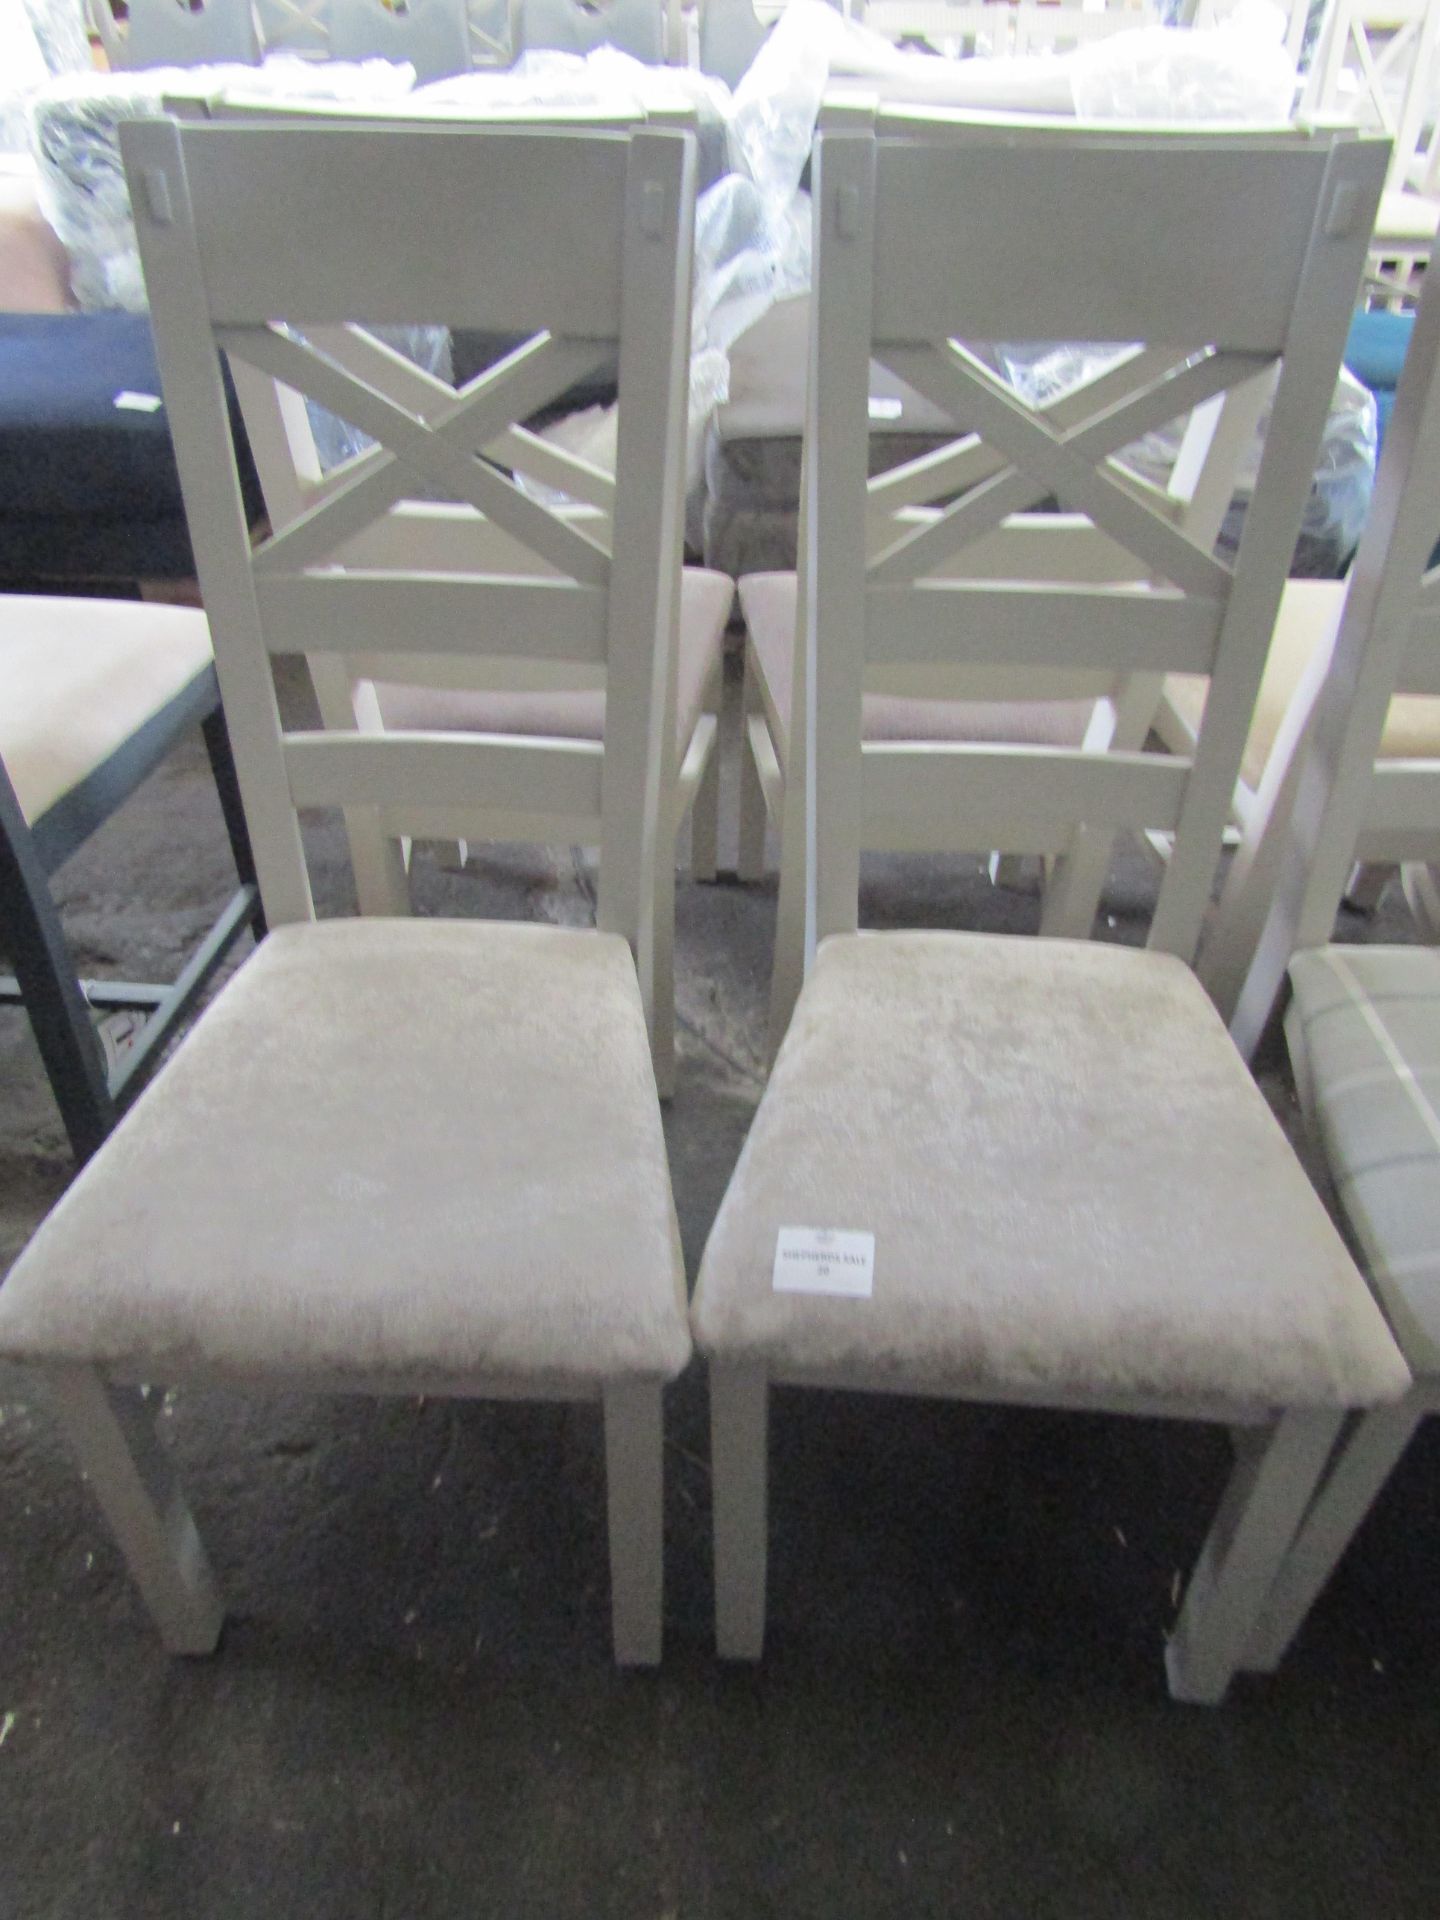 Oak Furnitureland St Ives Light Grey Painted Chair with Plain Truffle Fabric Seat RRP 380.00 About